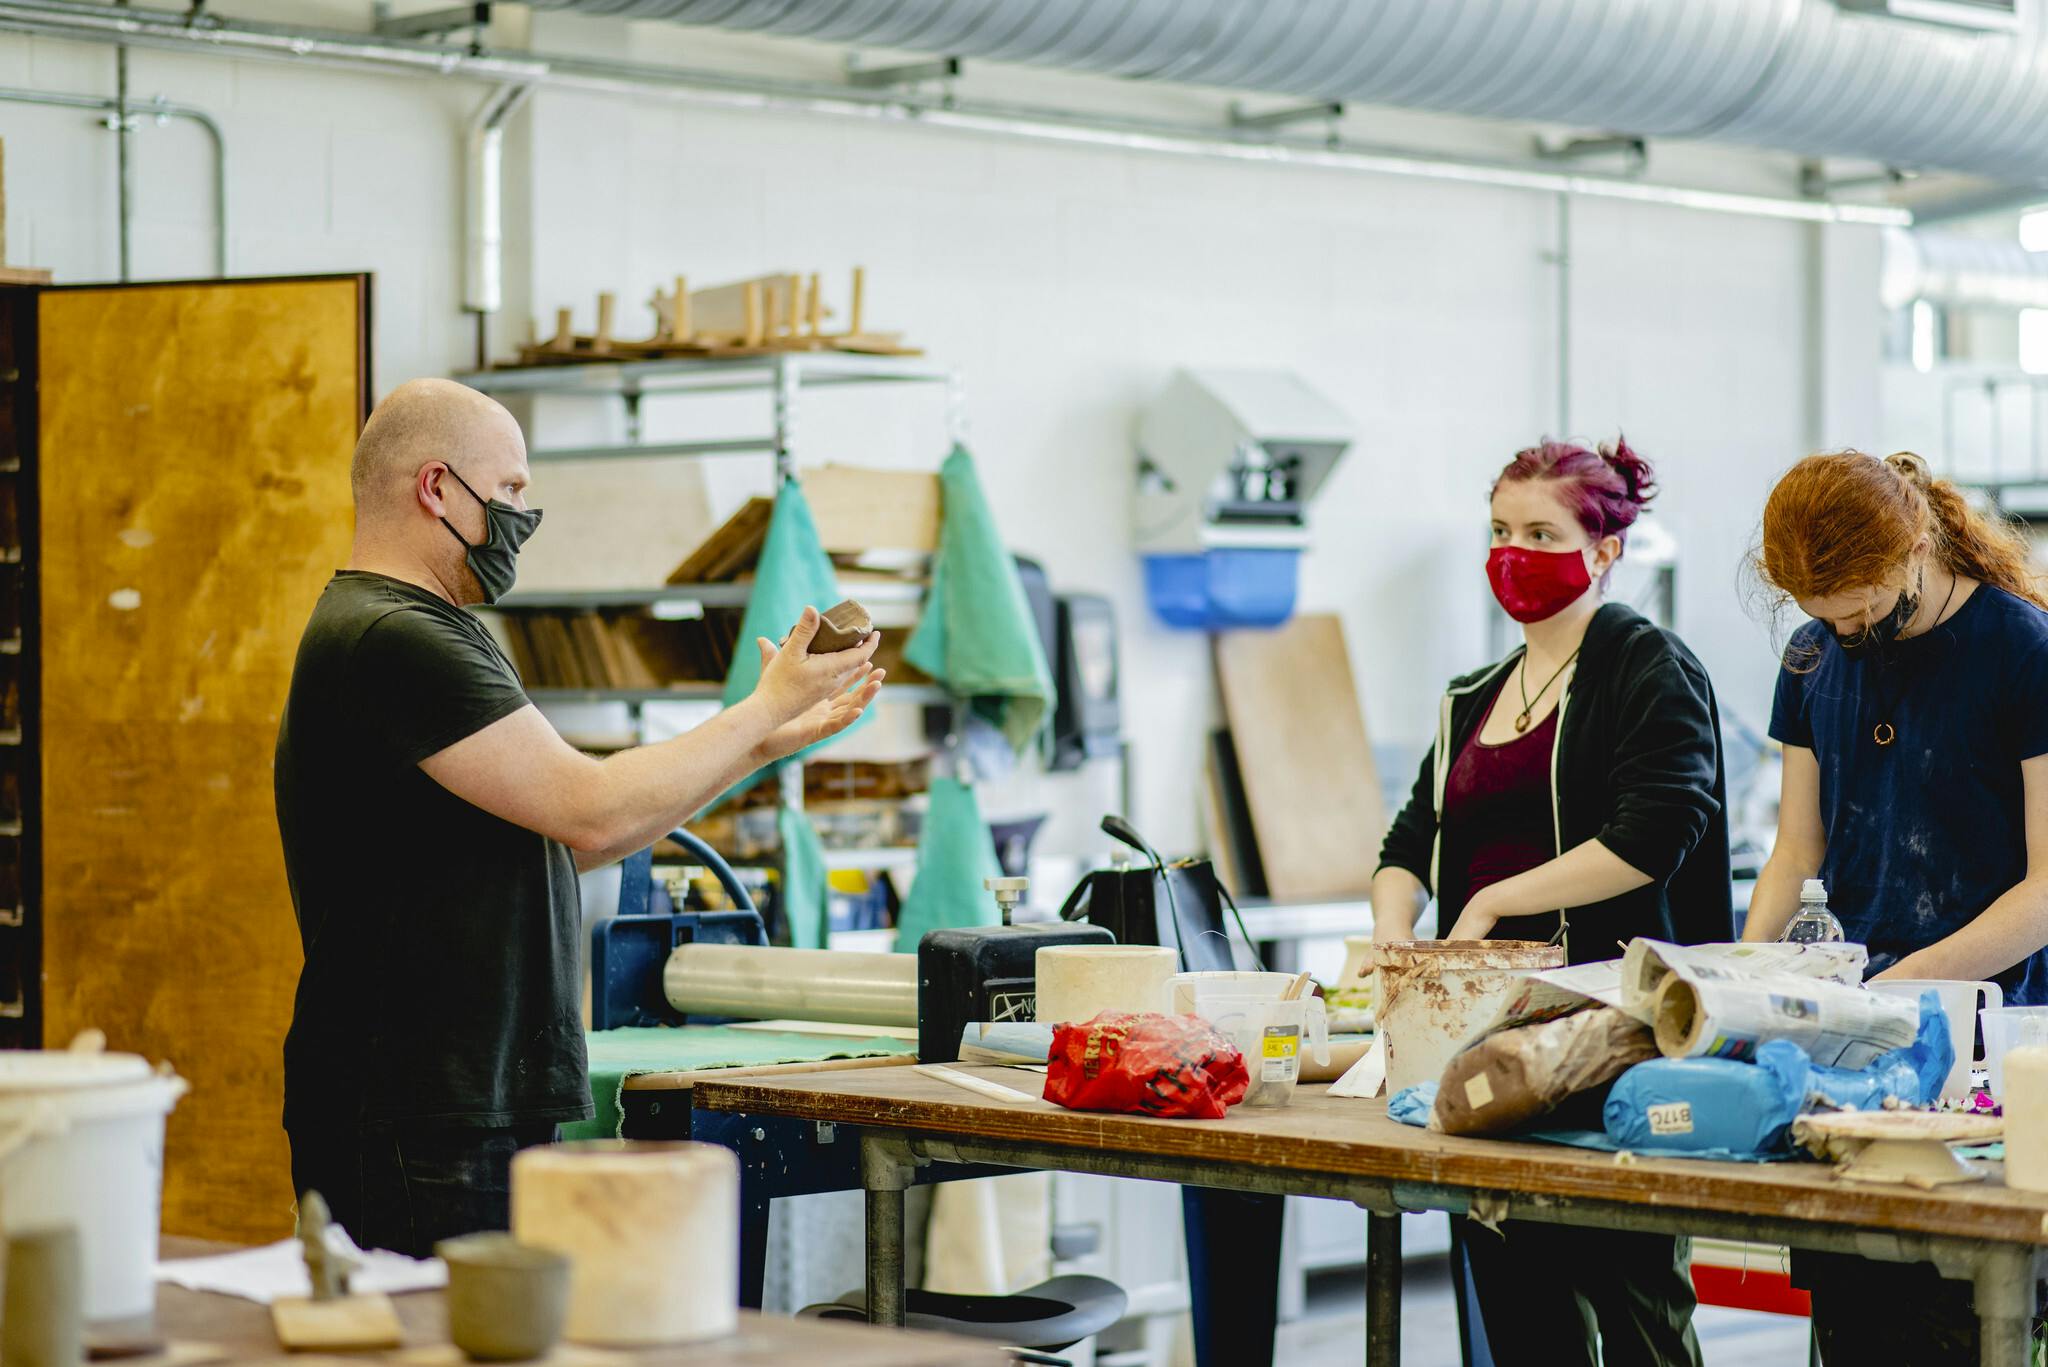 Technician Dan Chapple shows two students examples of clay in the Plymouth College of Art ceramics studio. The table in the centre is filled with the students ceramic creations and tools for ceramics